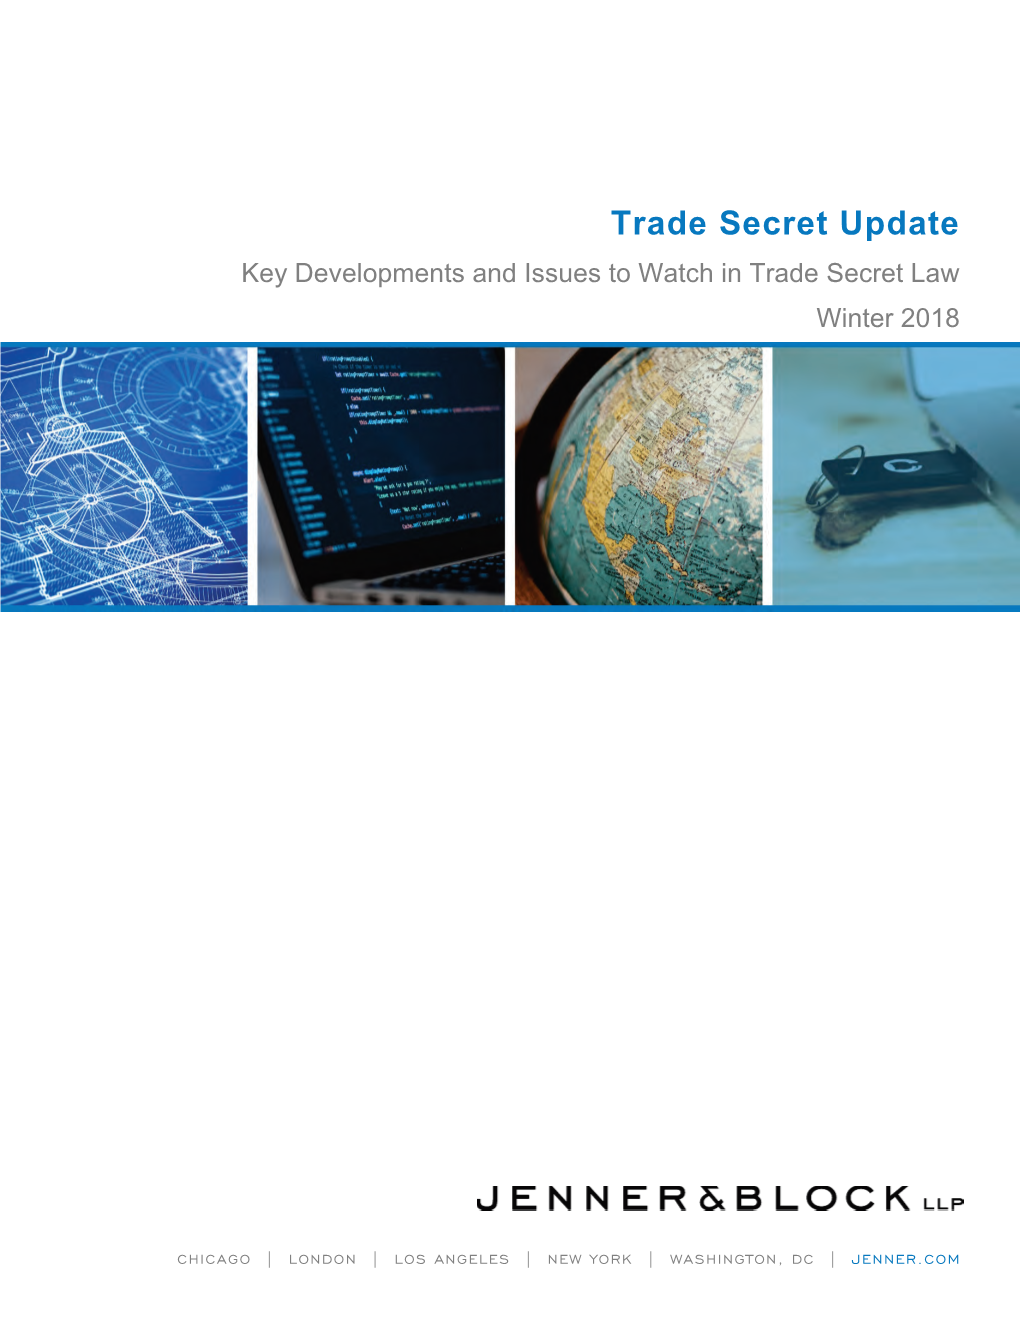 Trade Secret Update Key Developments and Issues to Watch in Trade Secret Law Winter 2018